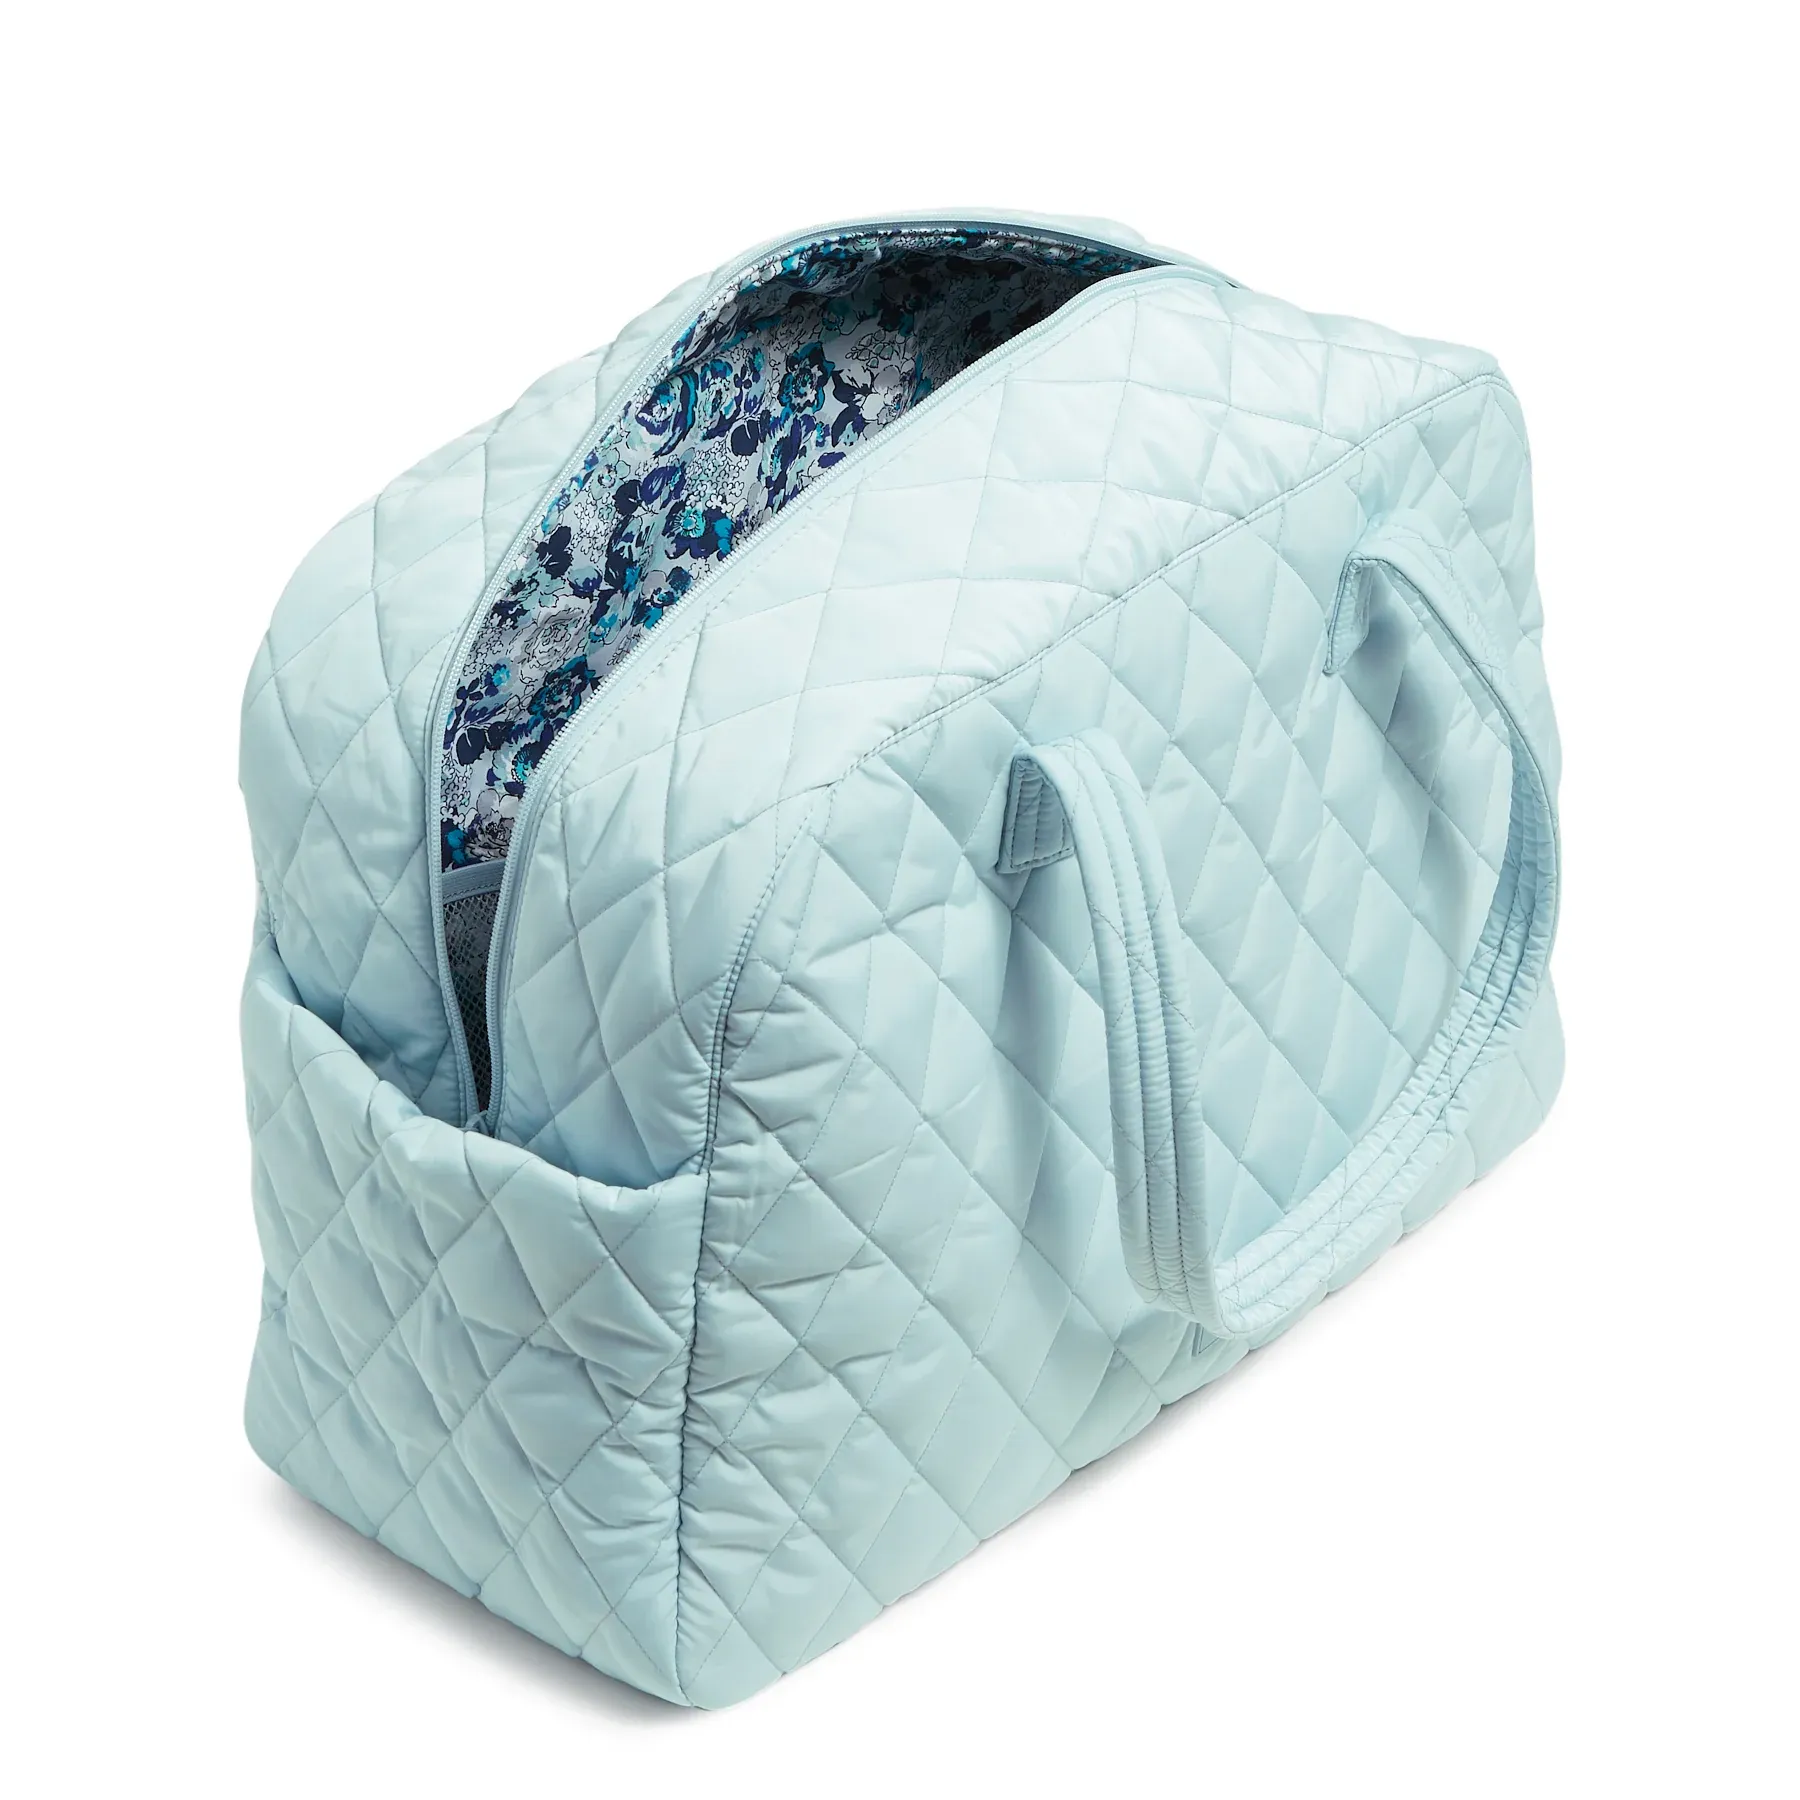 A pale blue quilted duffle bag with a floral pattern interior.